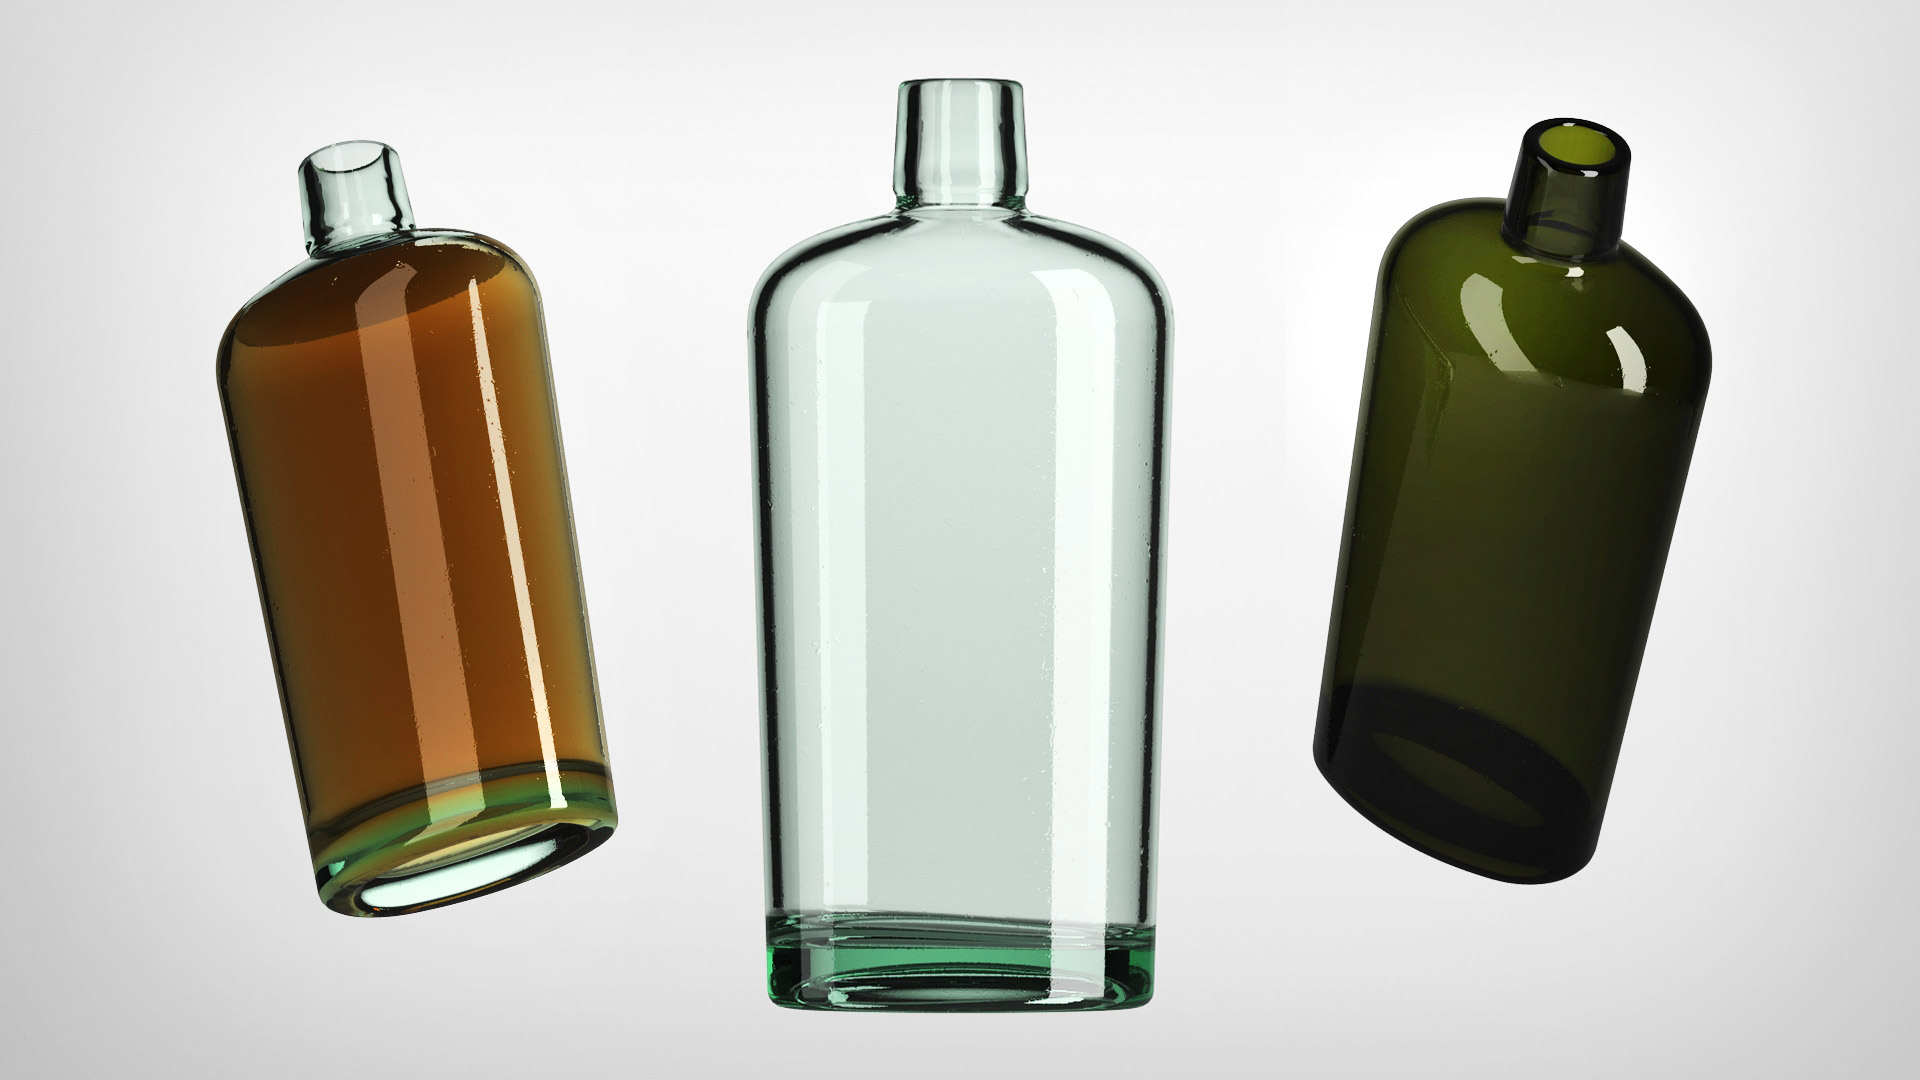 Global Package holds ample inventory of the eco-friendly and sustainably produced RUDE collection of glass bottles for wine and spirits from Estal